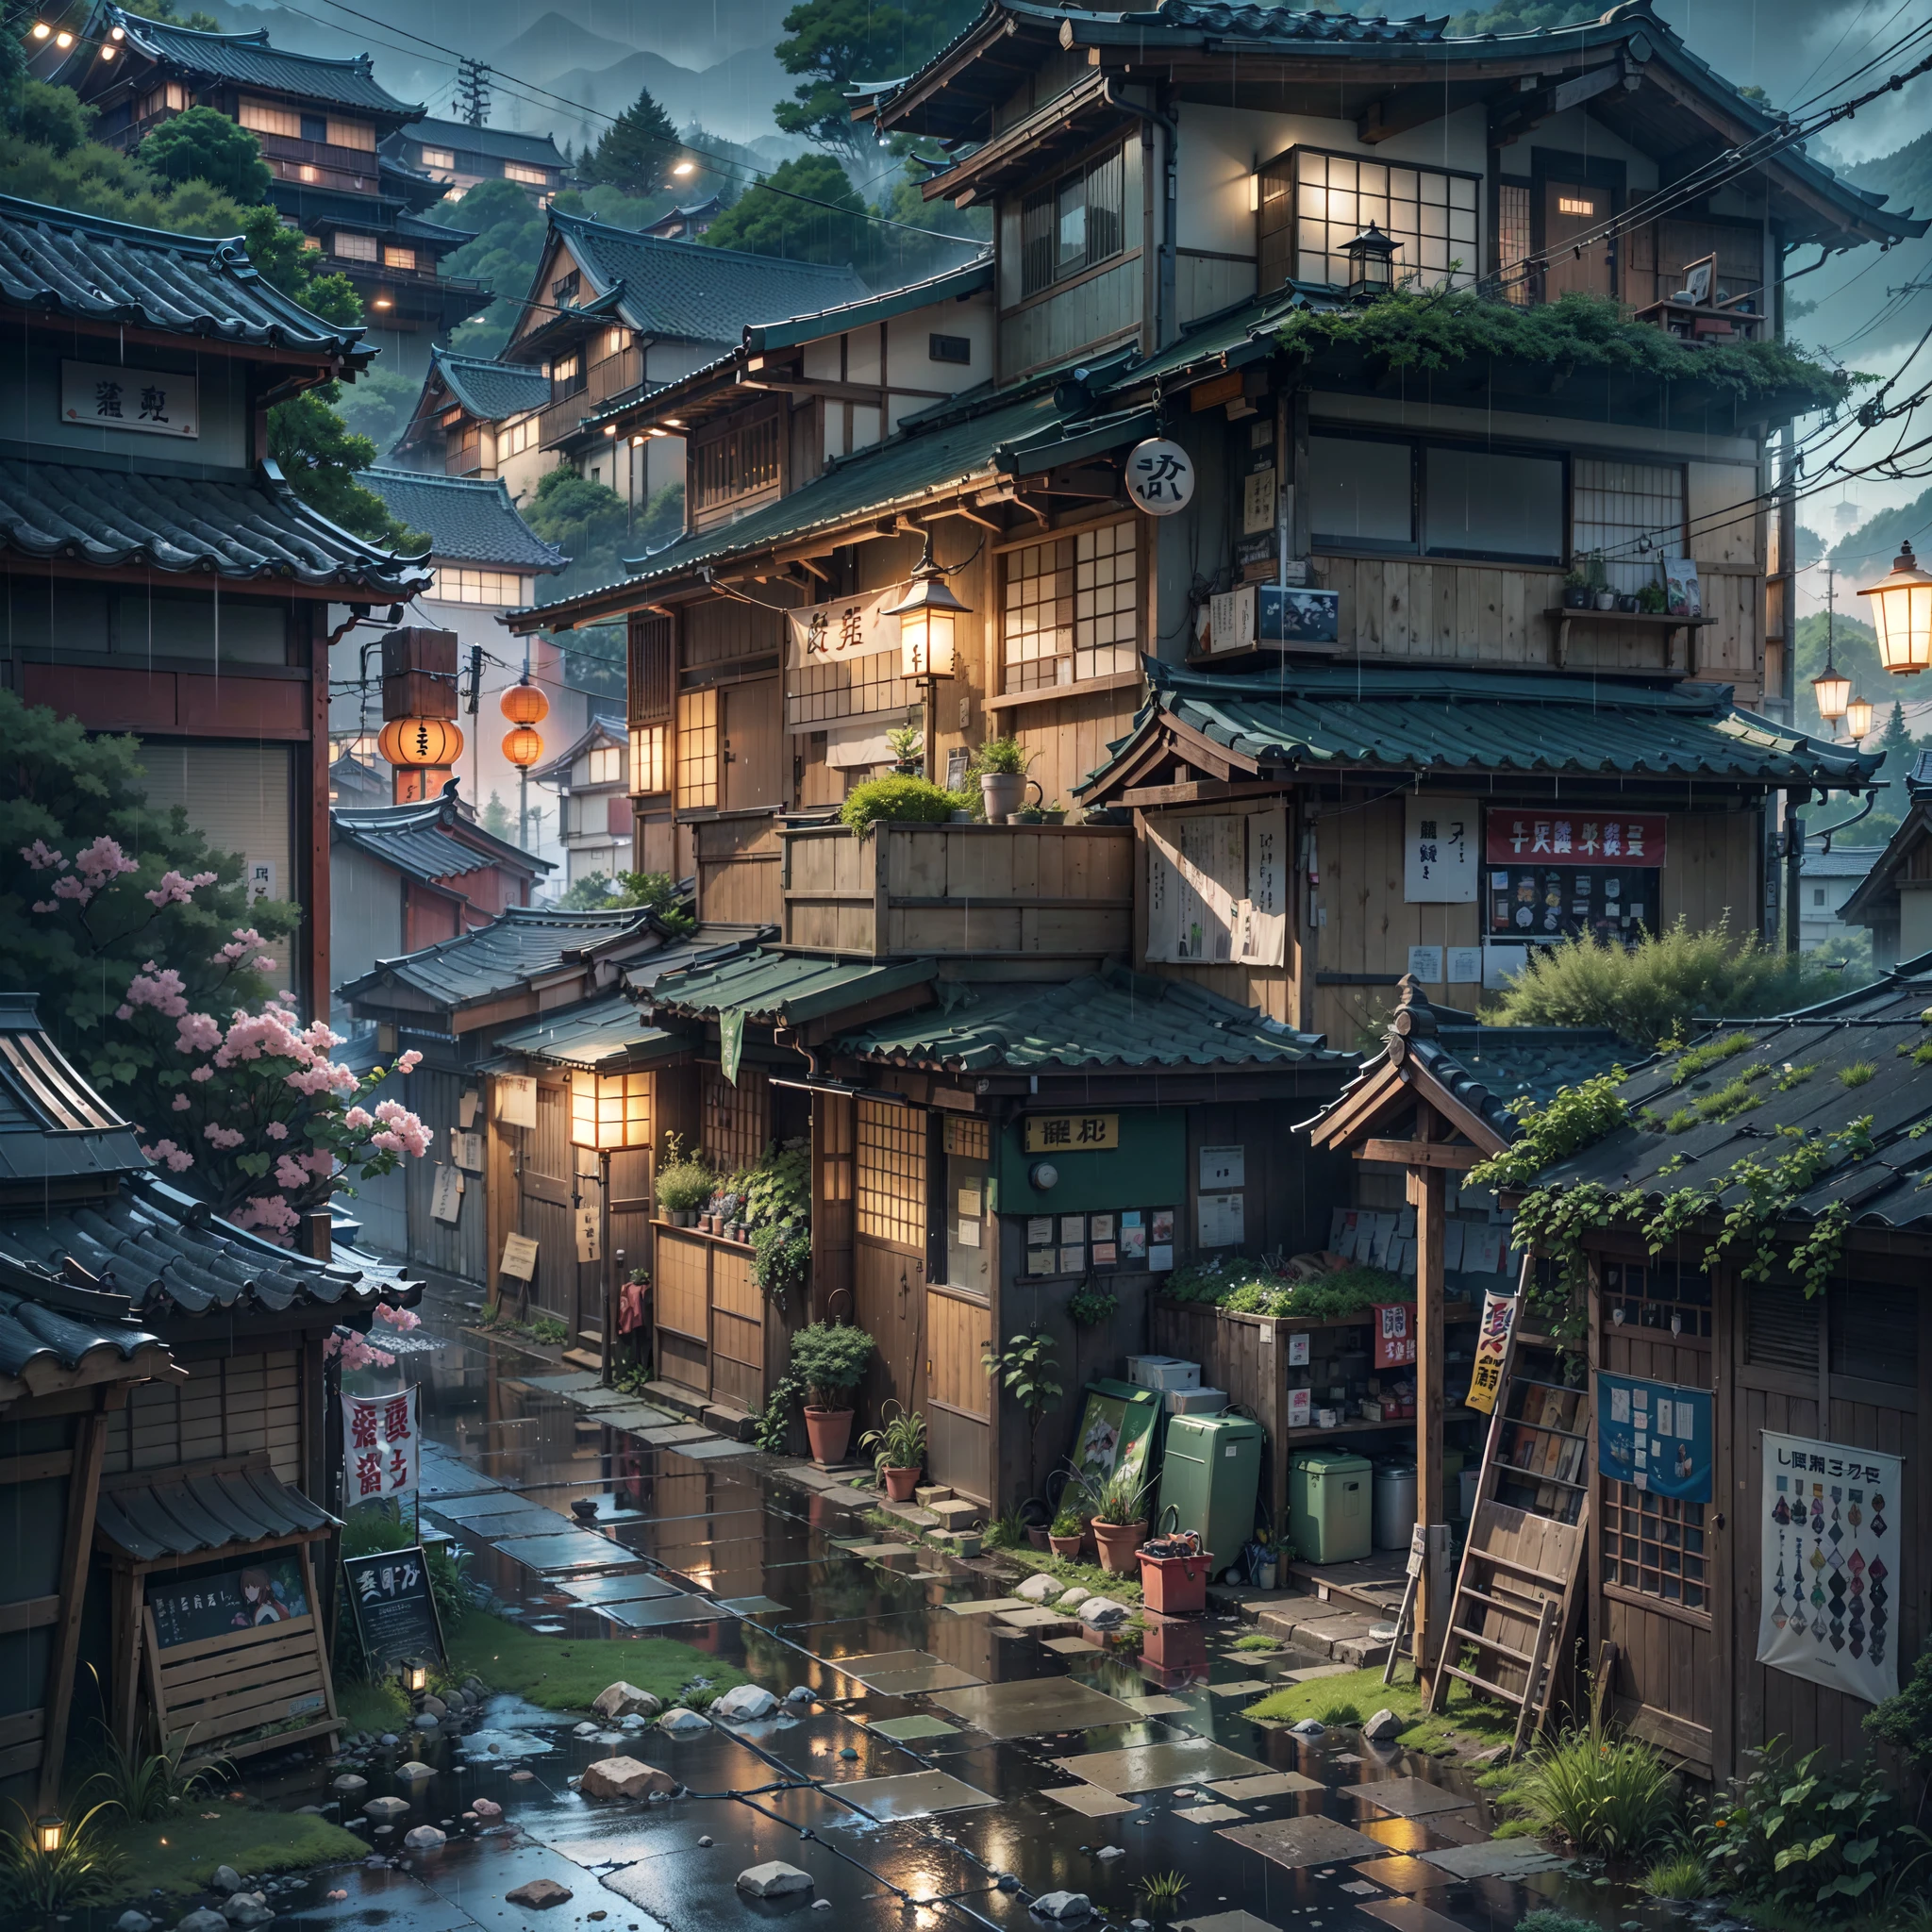 Anime, village, bus, tiger, fairy, museum, HD, 4K, AI Generated Art - Image  Chest - Free Image Hosting And Sharing Made Easy